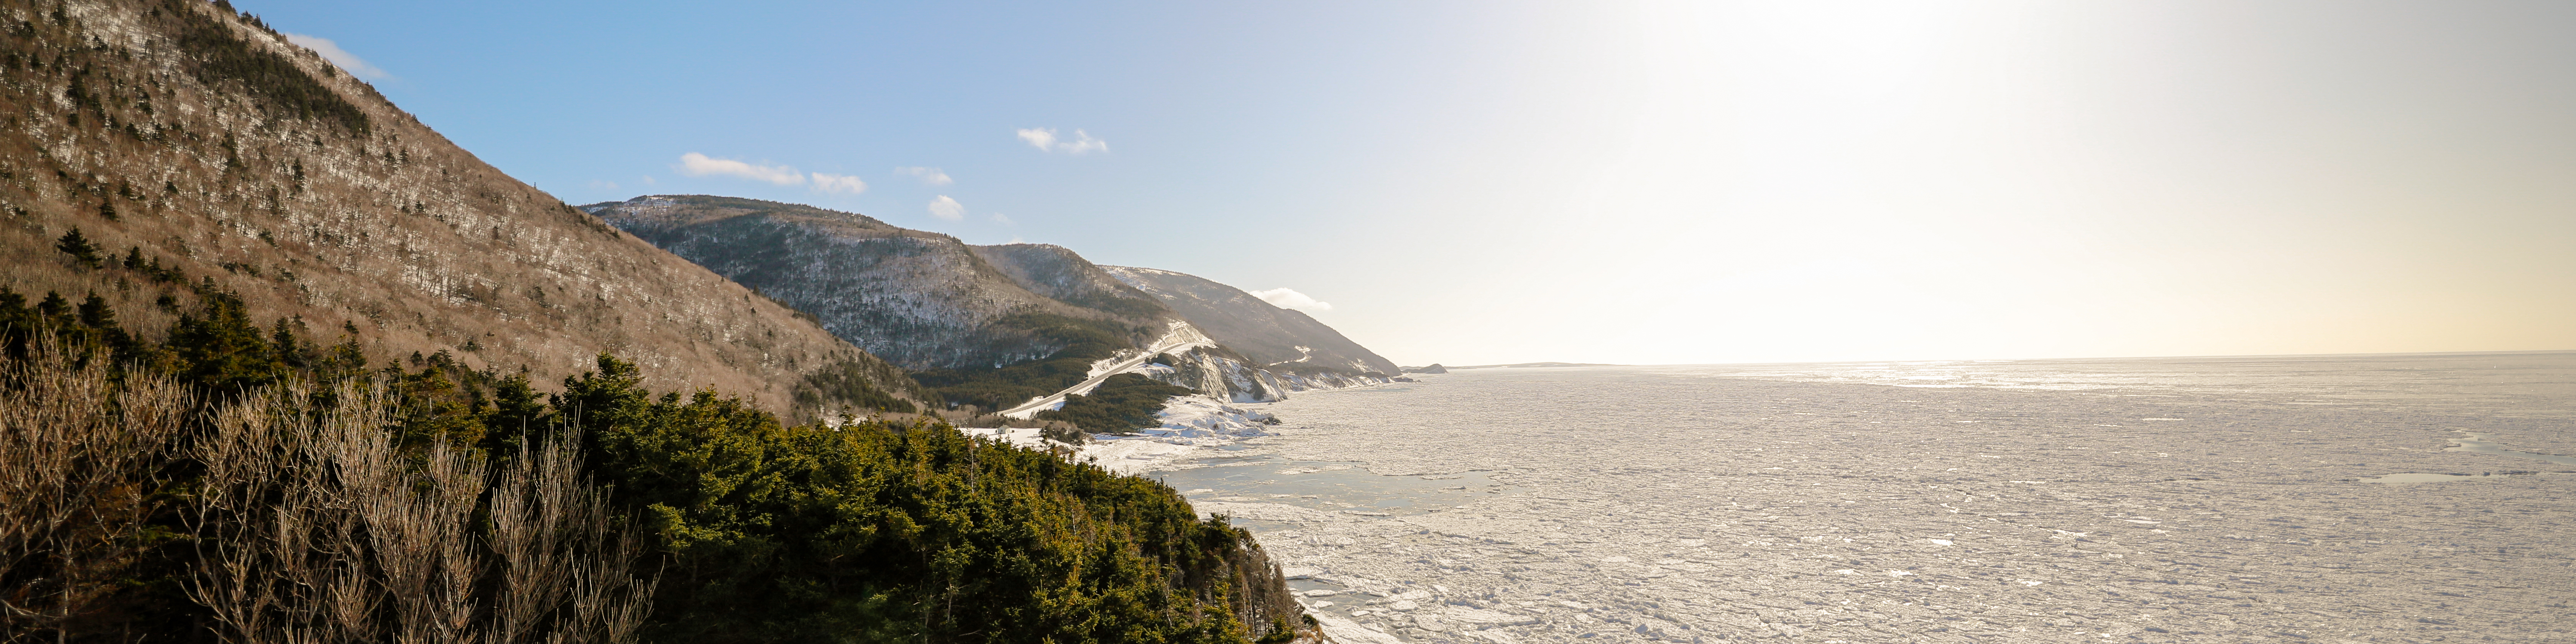 A view of the Cape Breton Highlands National Park looking along the coastline in the winter.